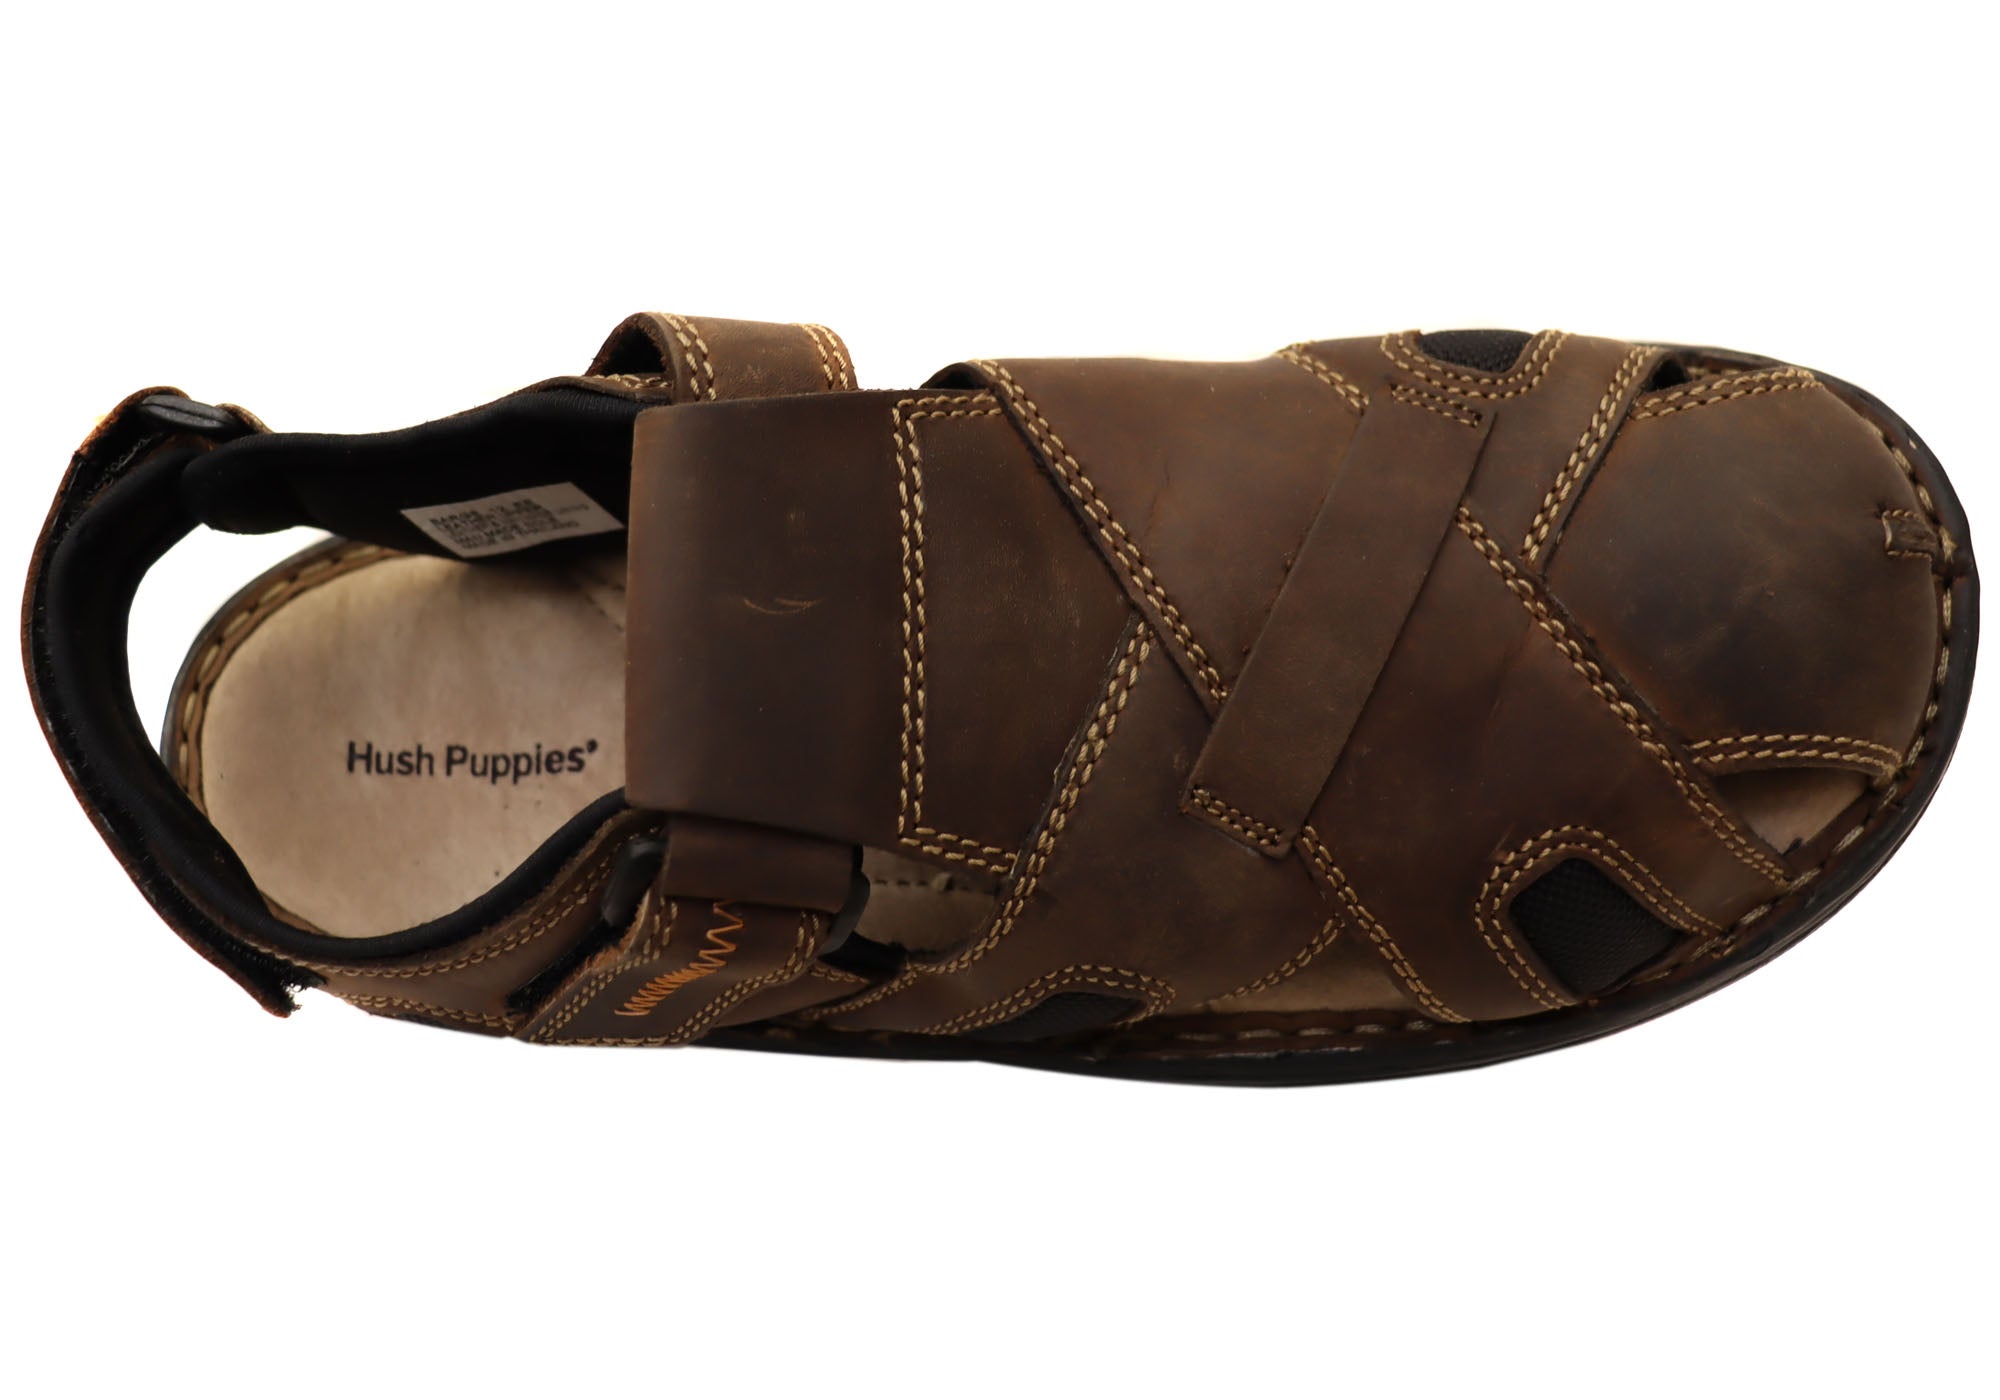 Hush Puppies Barge Mens Leather Closed Toe Sandals